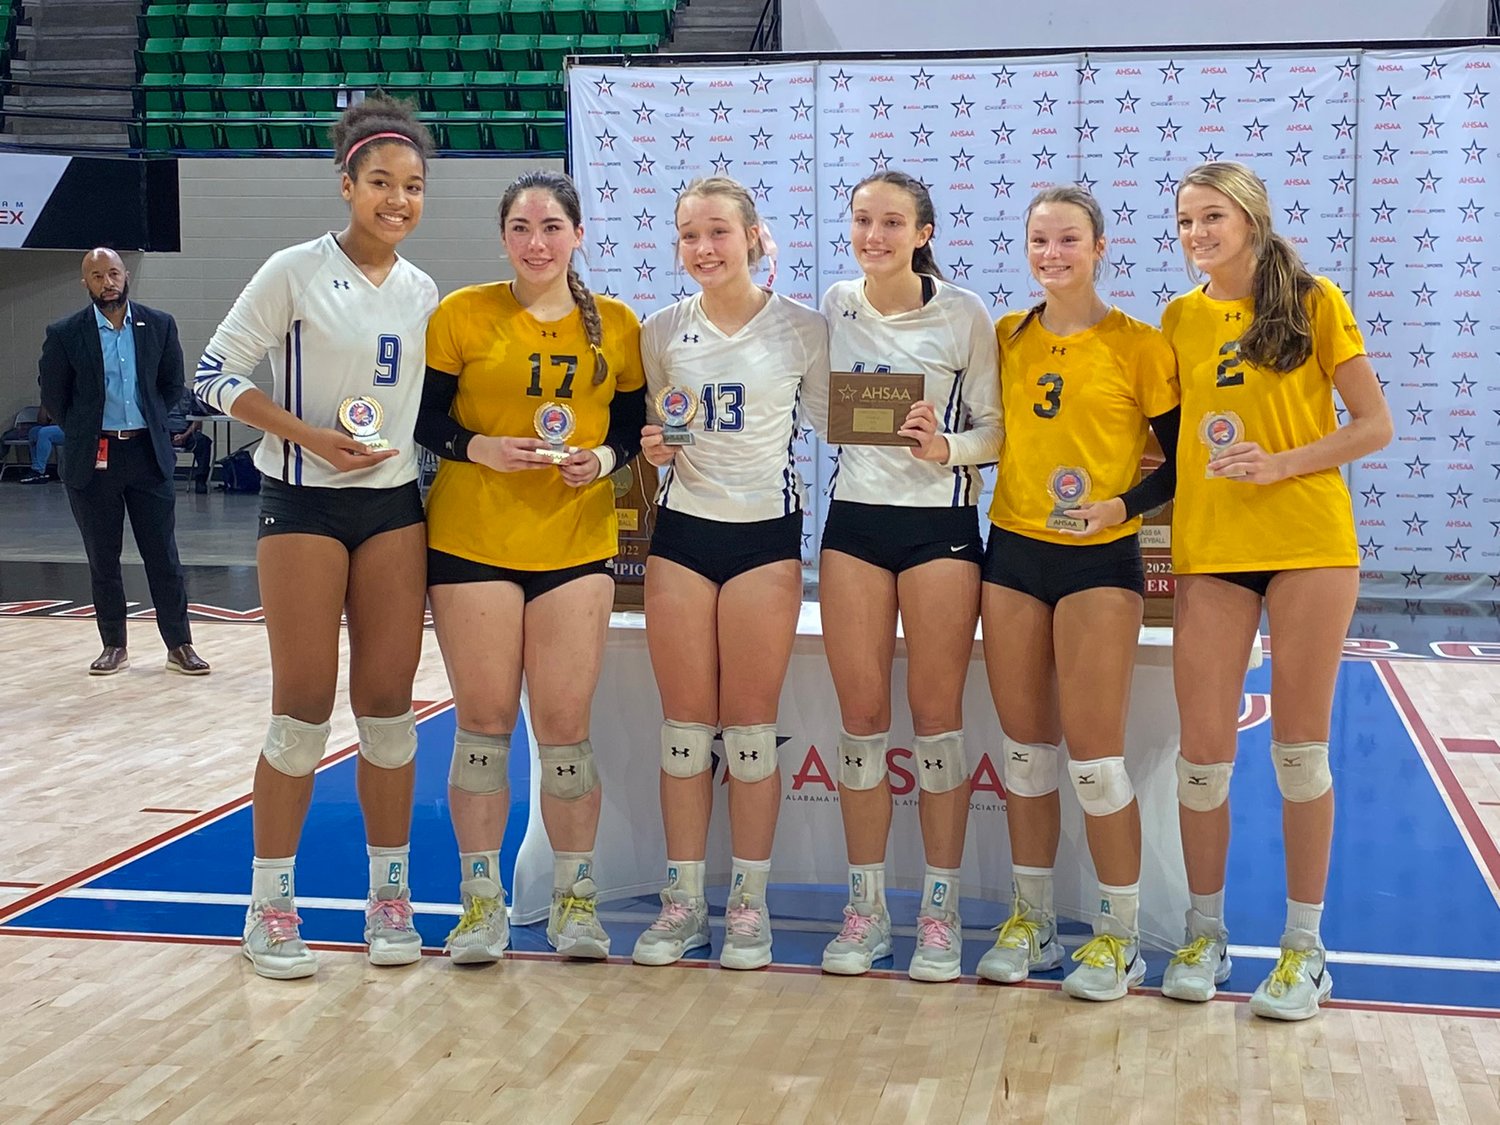 The Class 6A All-State Tournament team included Haley Robinson, Alexis Belarmino, Misty Kate Smith, Blakeley Robbins (MVP), Bailey Hope and Reese Varden.